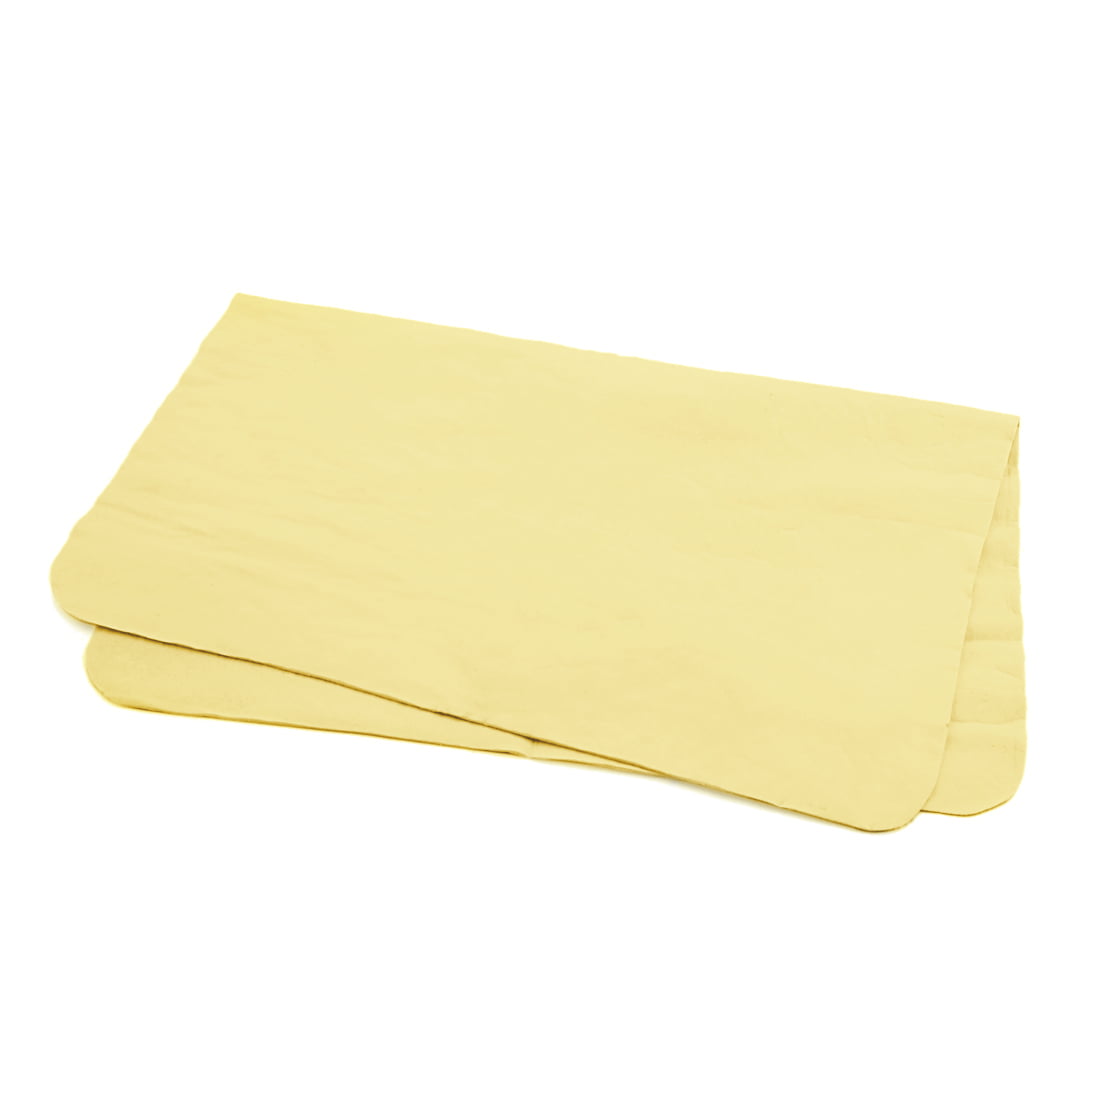 1X Car Natural Chamois Leather Car Cleaning Cloth Washing Absorbent Dry Towel KW 